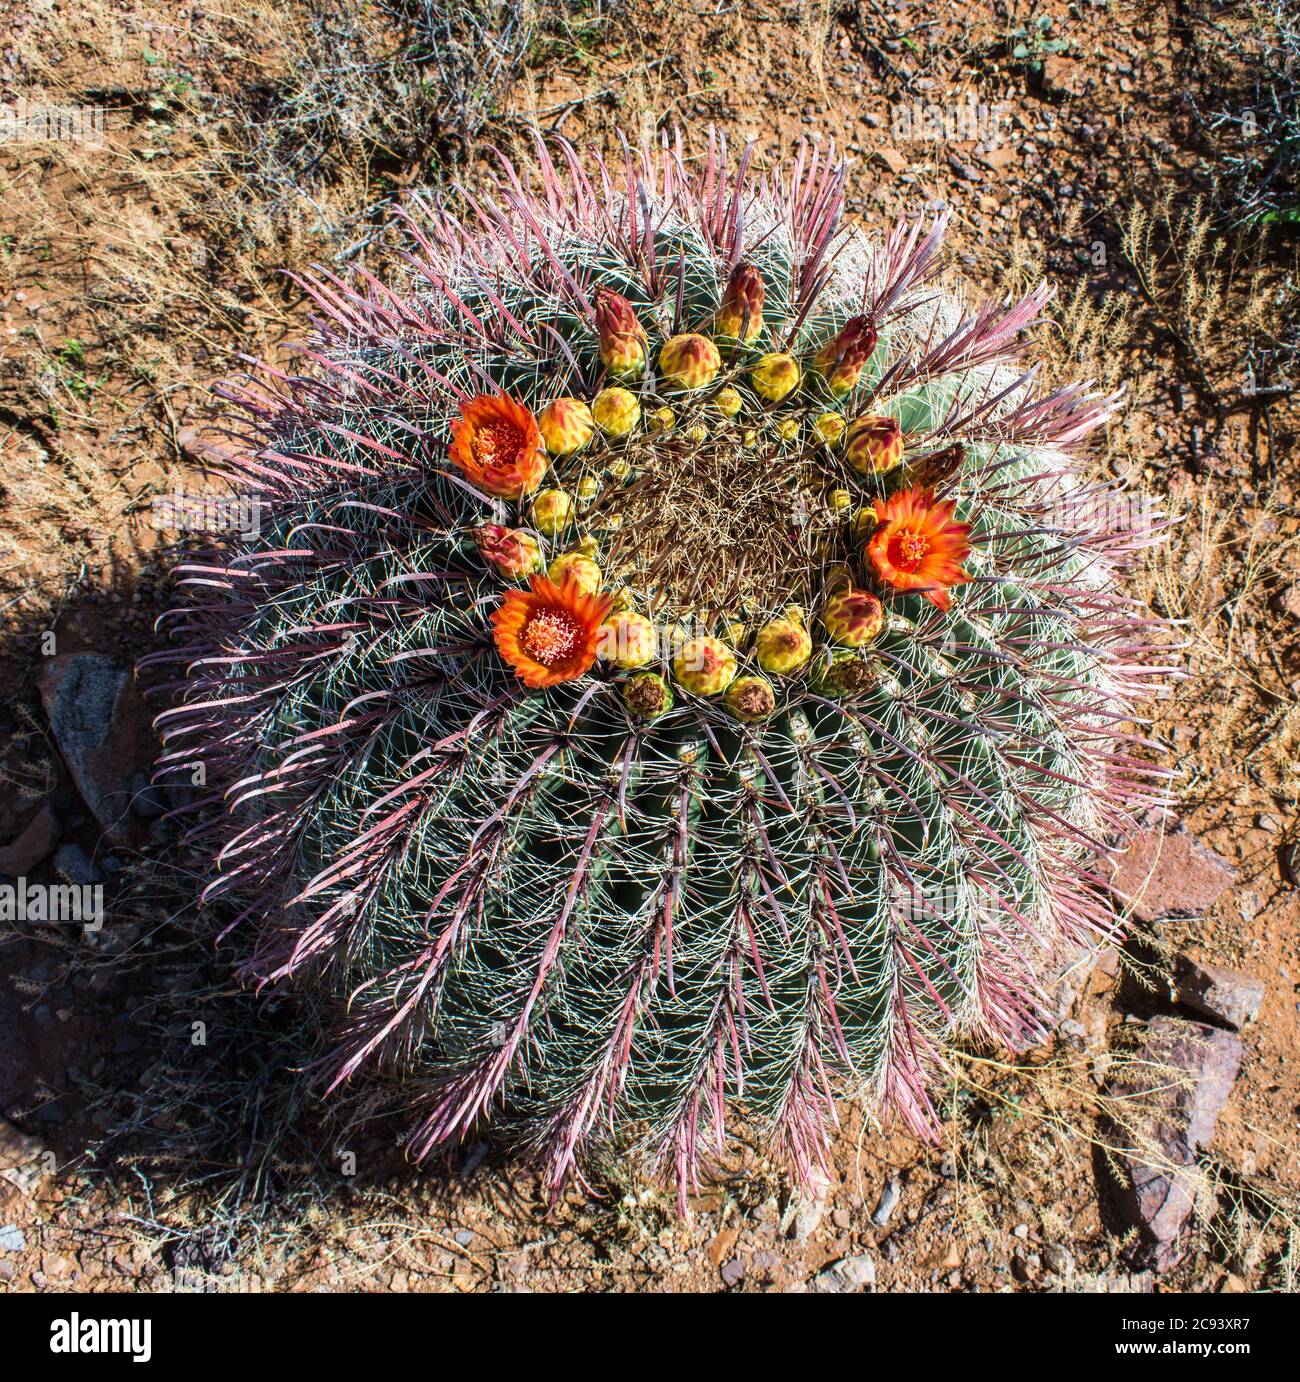 Barrel cactus in flower, New Mexico Stock Photo